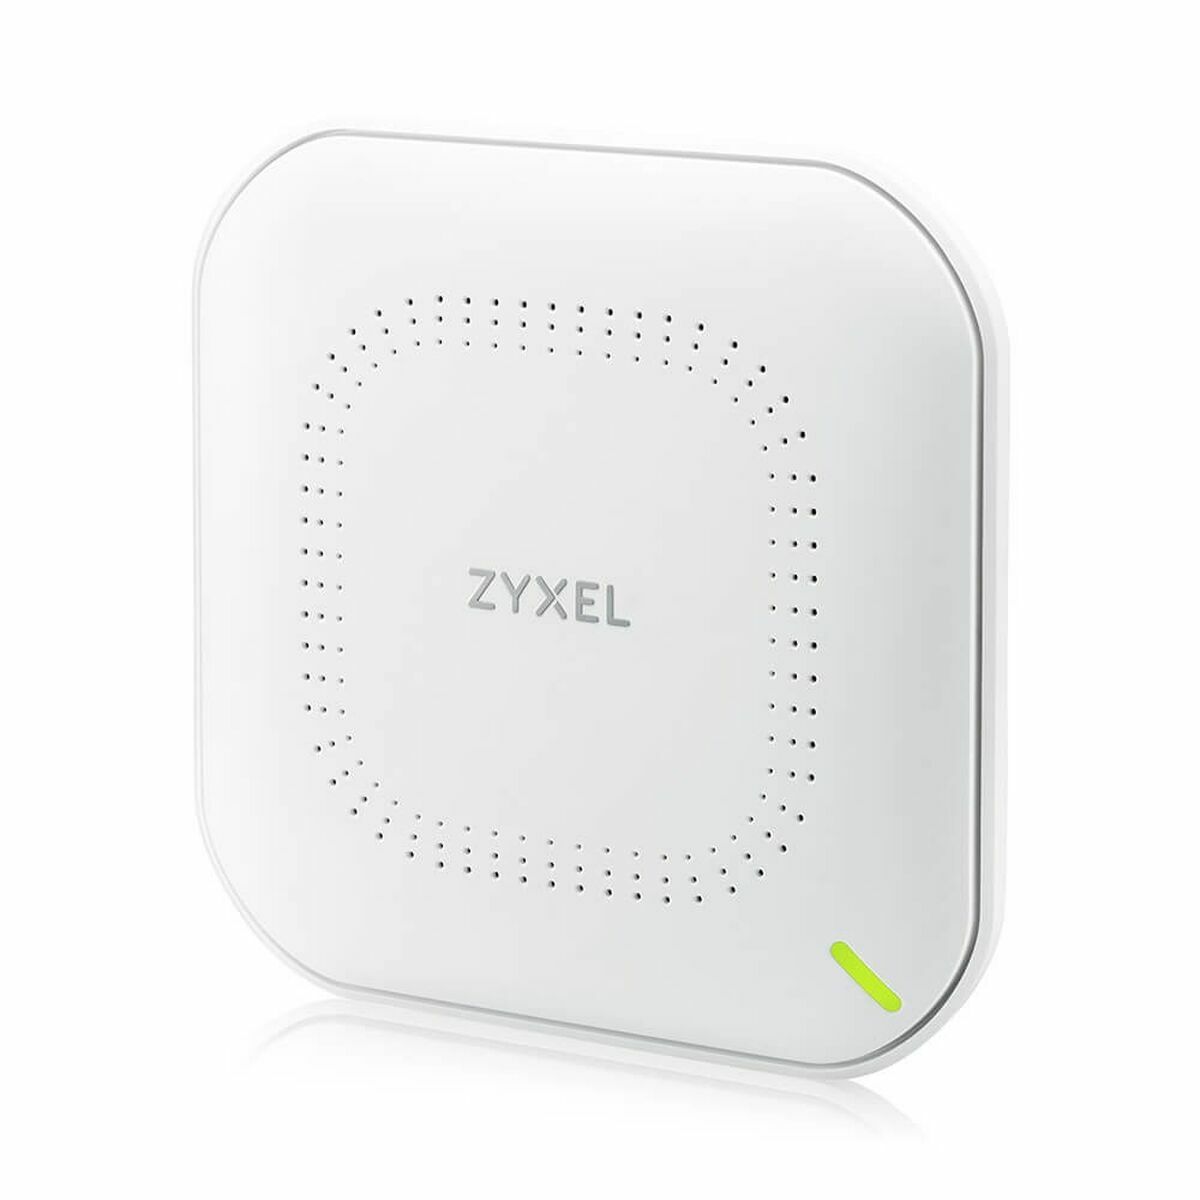 Access point ZyXEL NWA50AXPRO-EU0102F White, ZyXEL, Computing, Network devices, access-point-zyxel-nwa50axpro-eu0102f-white, Brand_ZyXEL, category-reference-2609, category-reference-2803, category-reference-2820, category-reference-t-19685, category-reference-t-19914, category-reference-t-21369, Condition_NEW, networks/wiring, Price_100 - 200, Teleworking, RiotNook